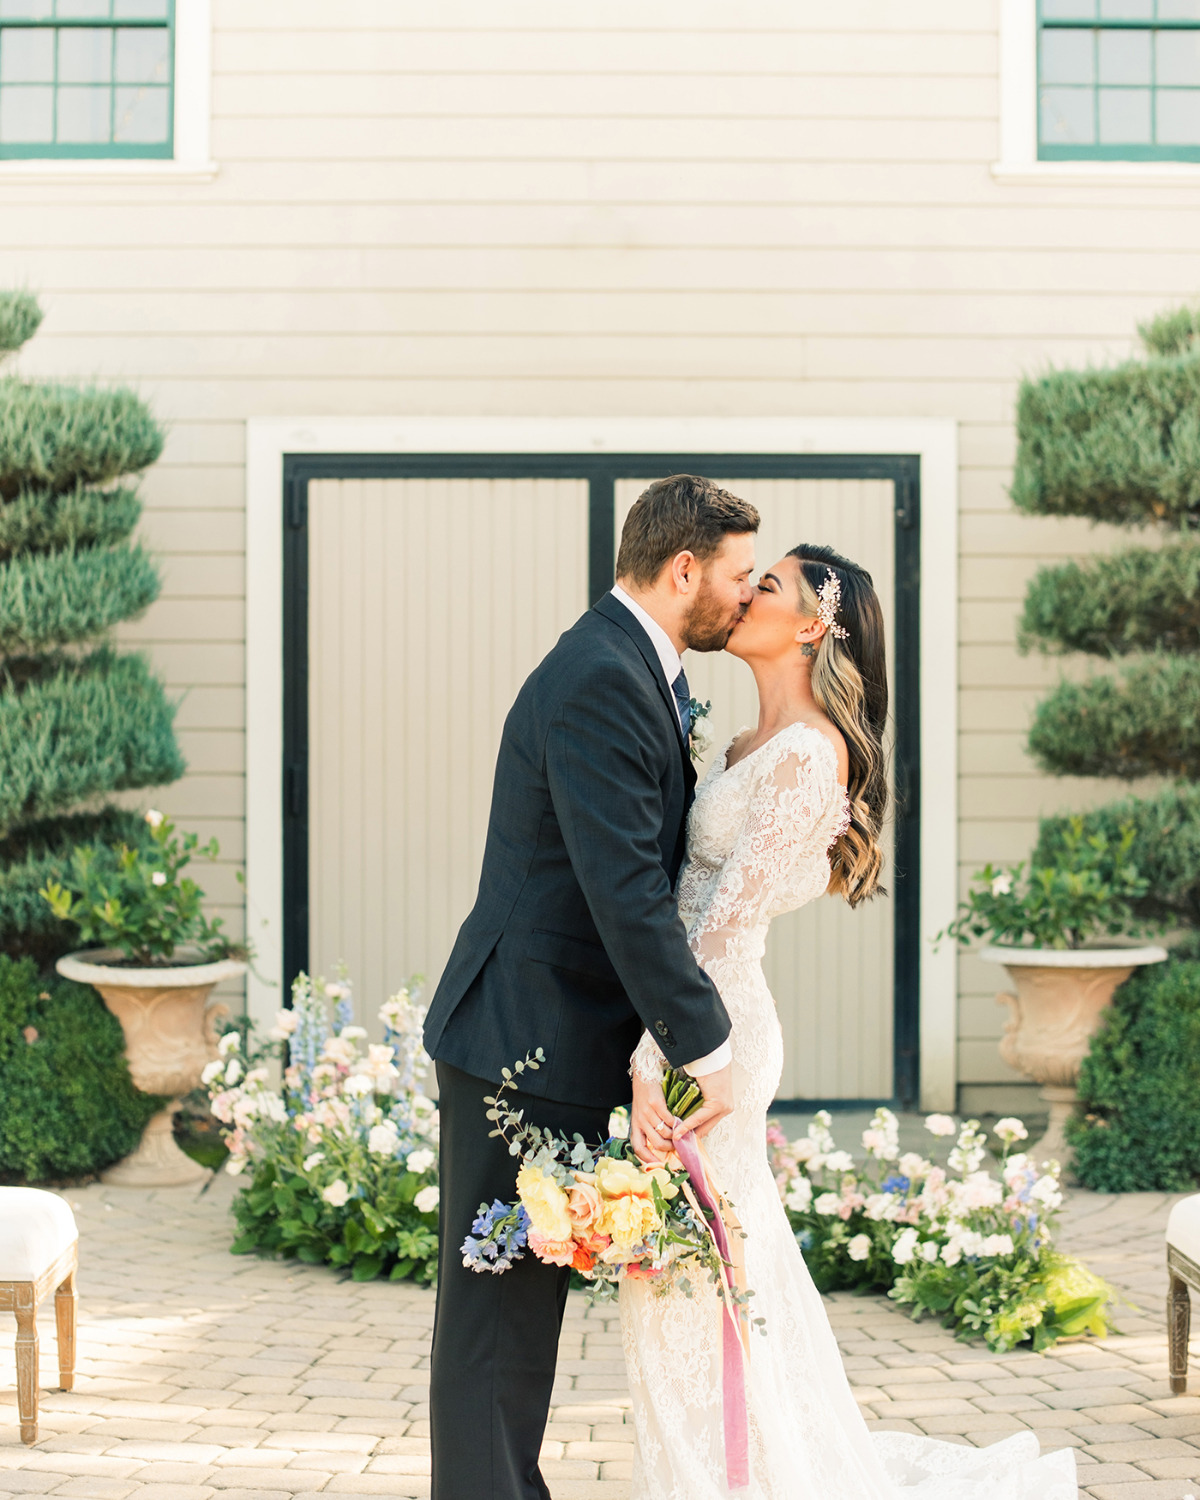 Micro Wedding Inspiration With Soft Neutrals, Exposed Wood, and Bright Pops Of Color